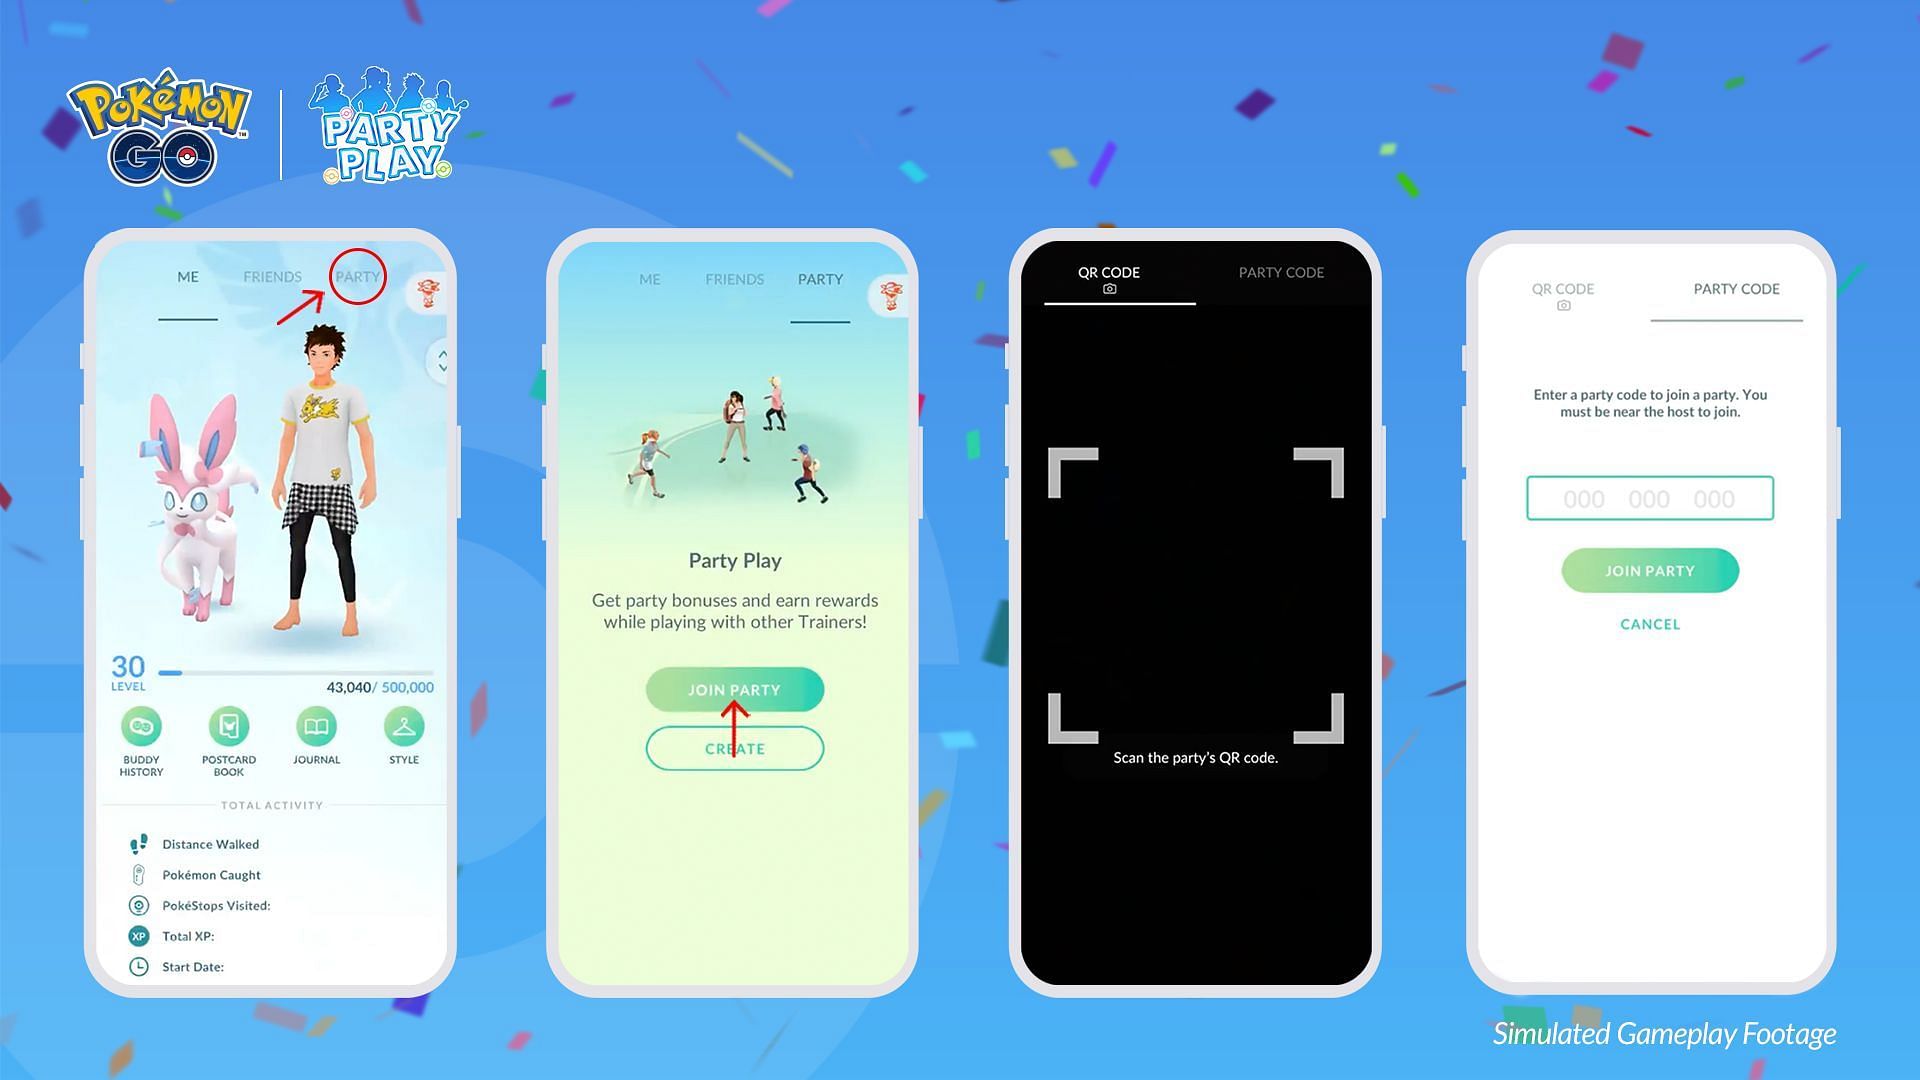 How to join a Party (Image via Niantic)